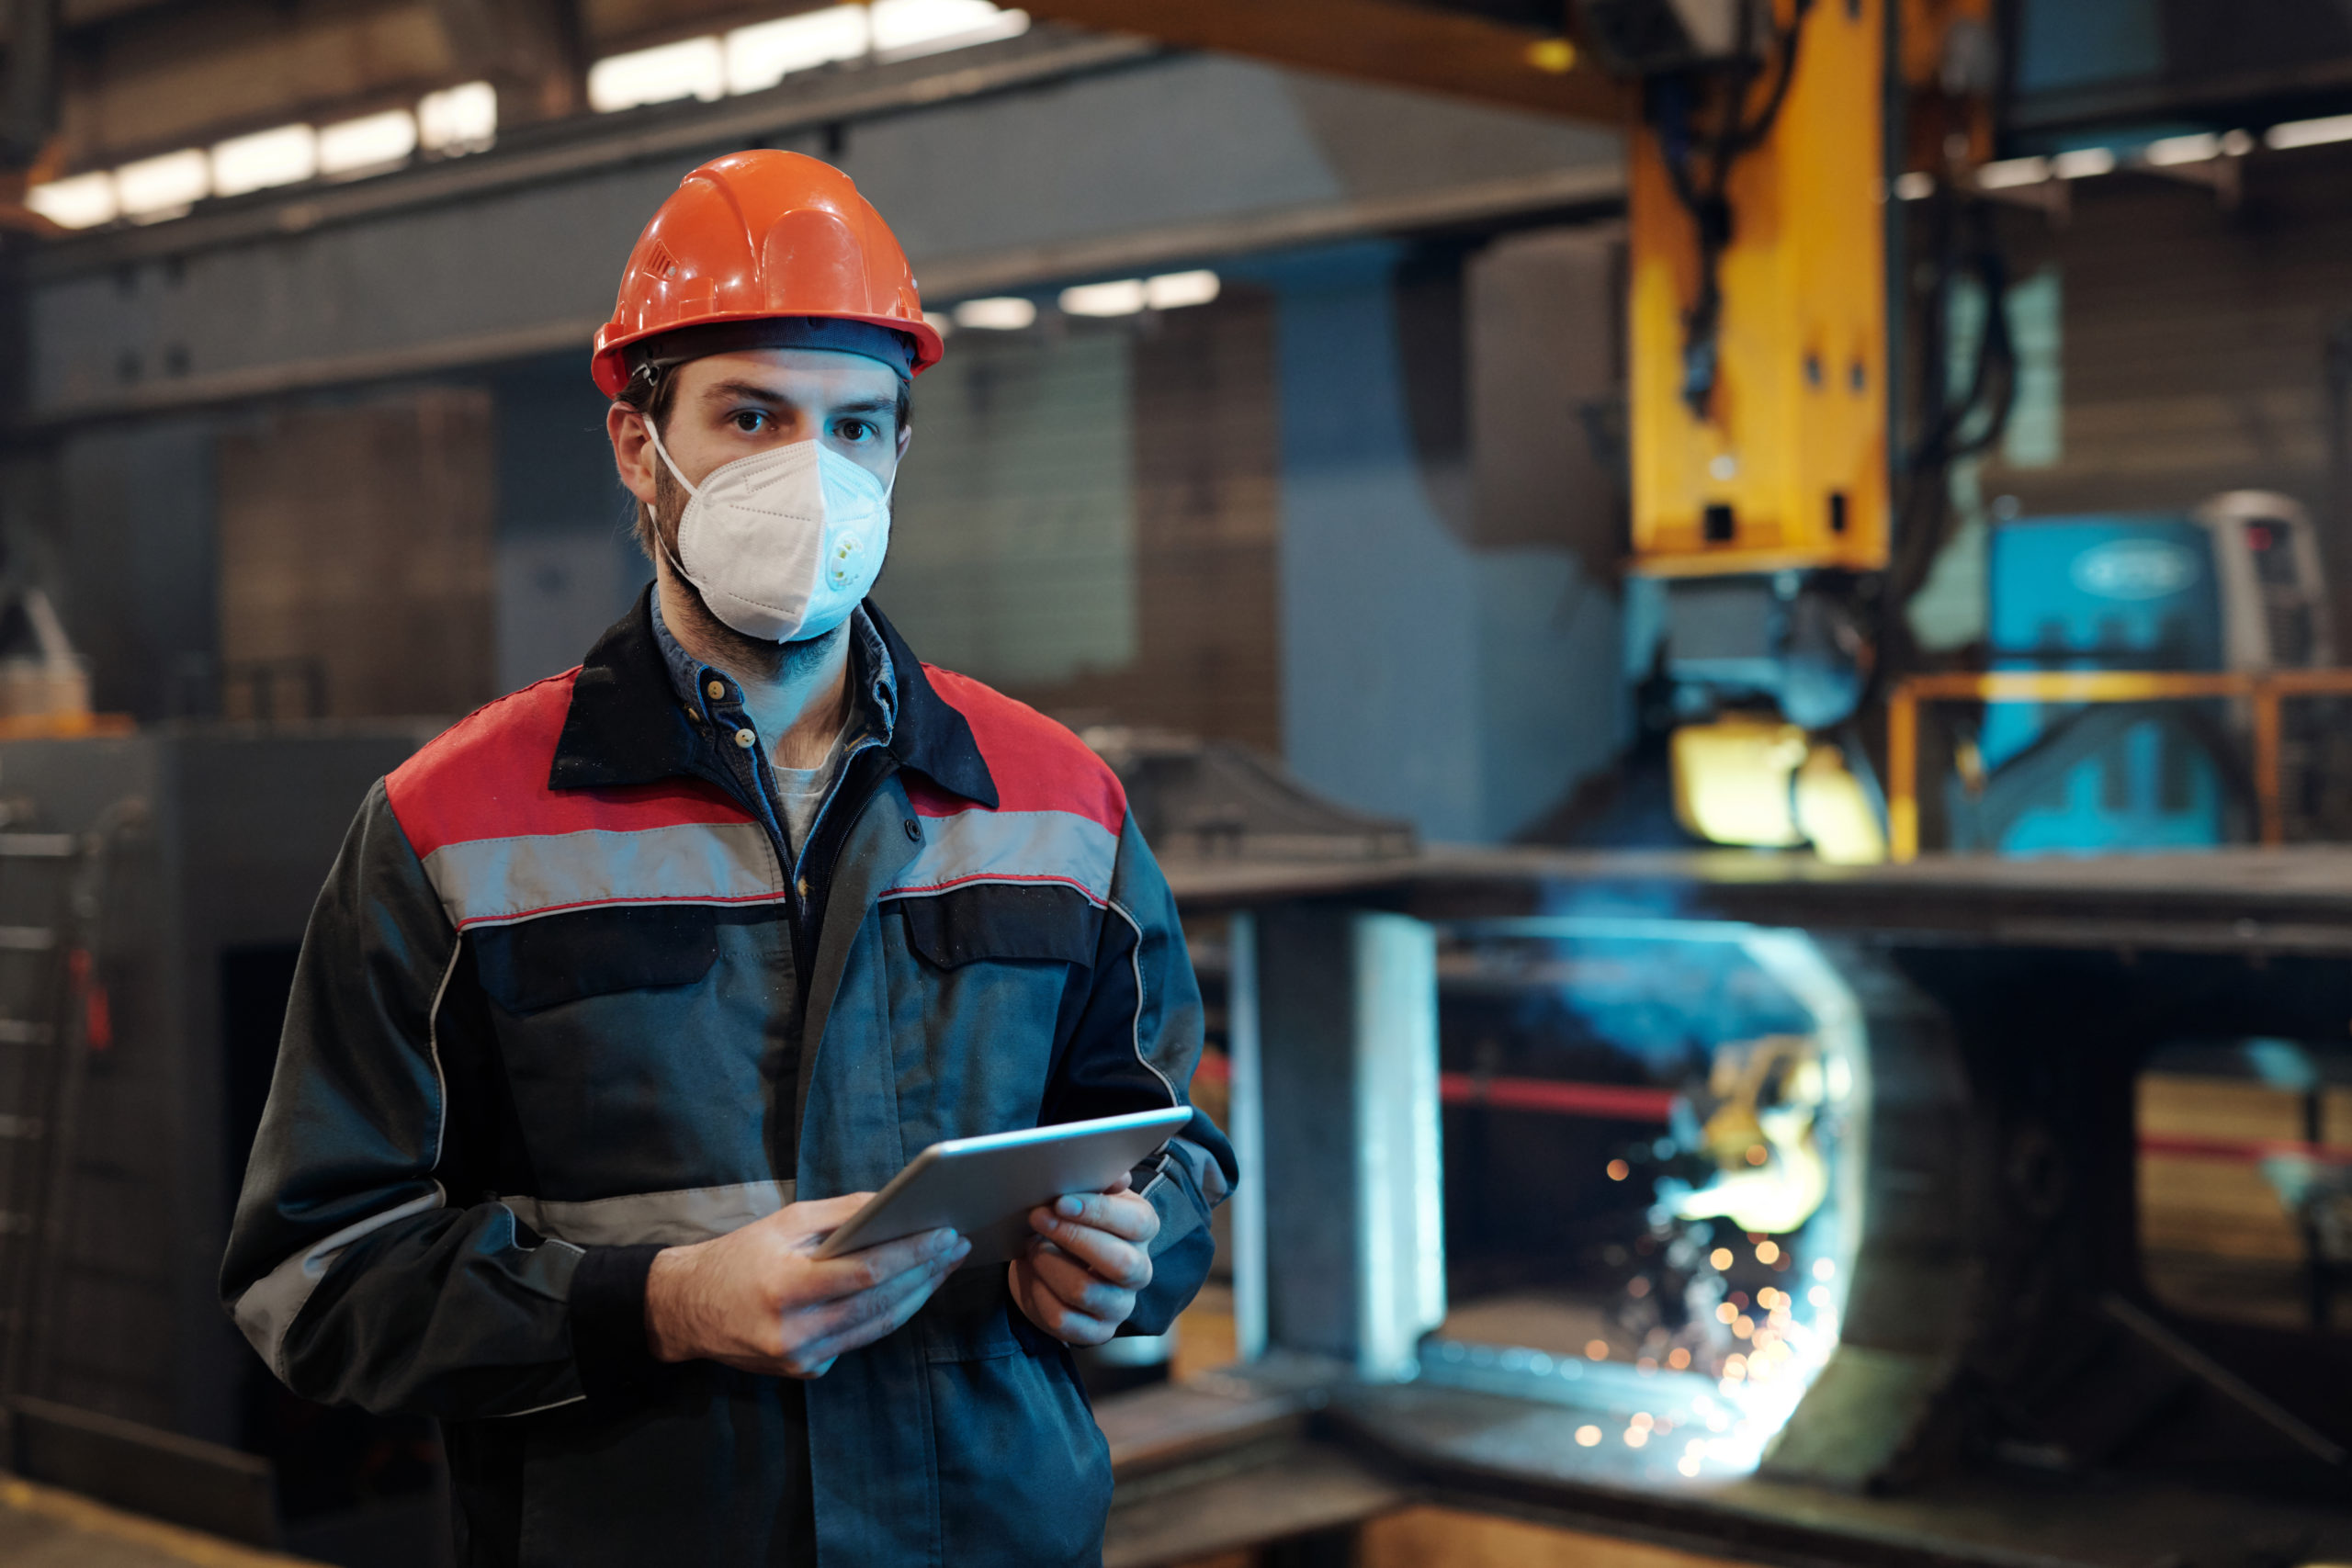 Contemporary factory engineer in protective workwear holding digital tablet while networking by his workplace in machinery plant